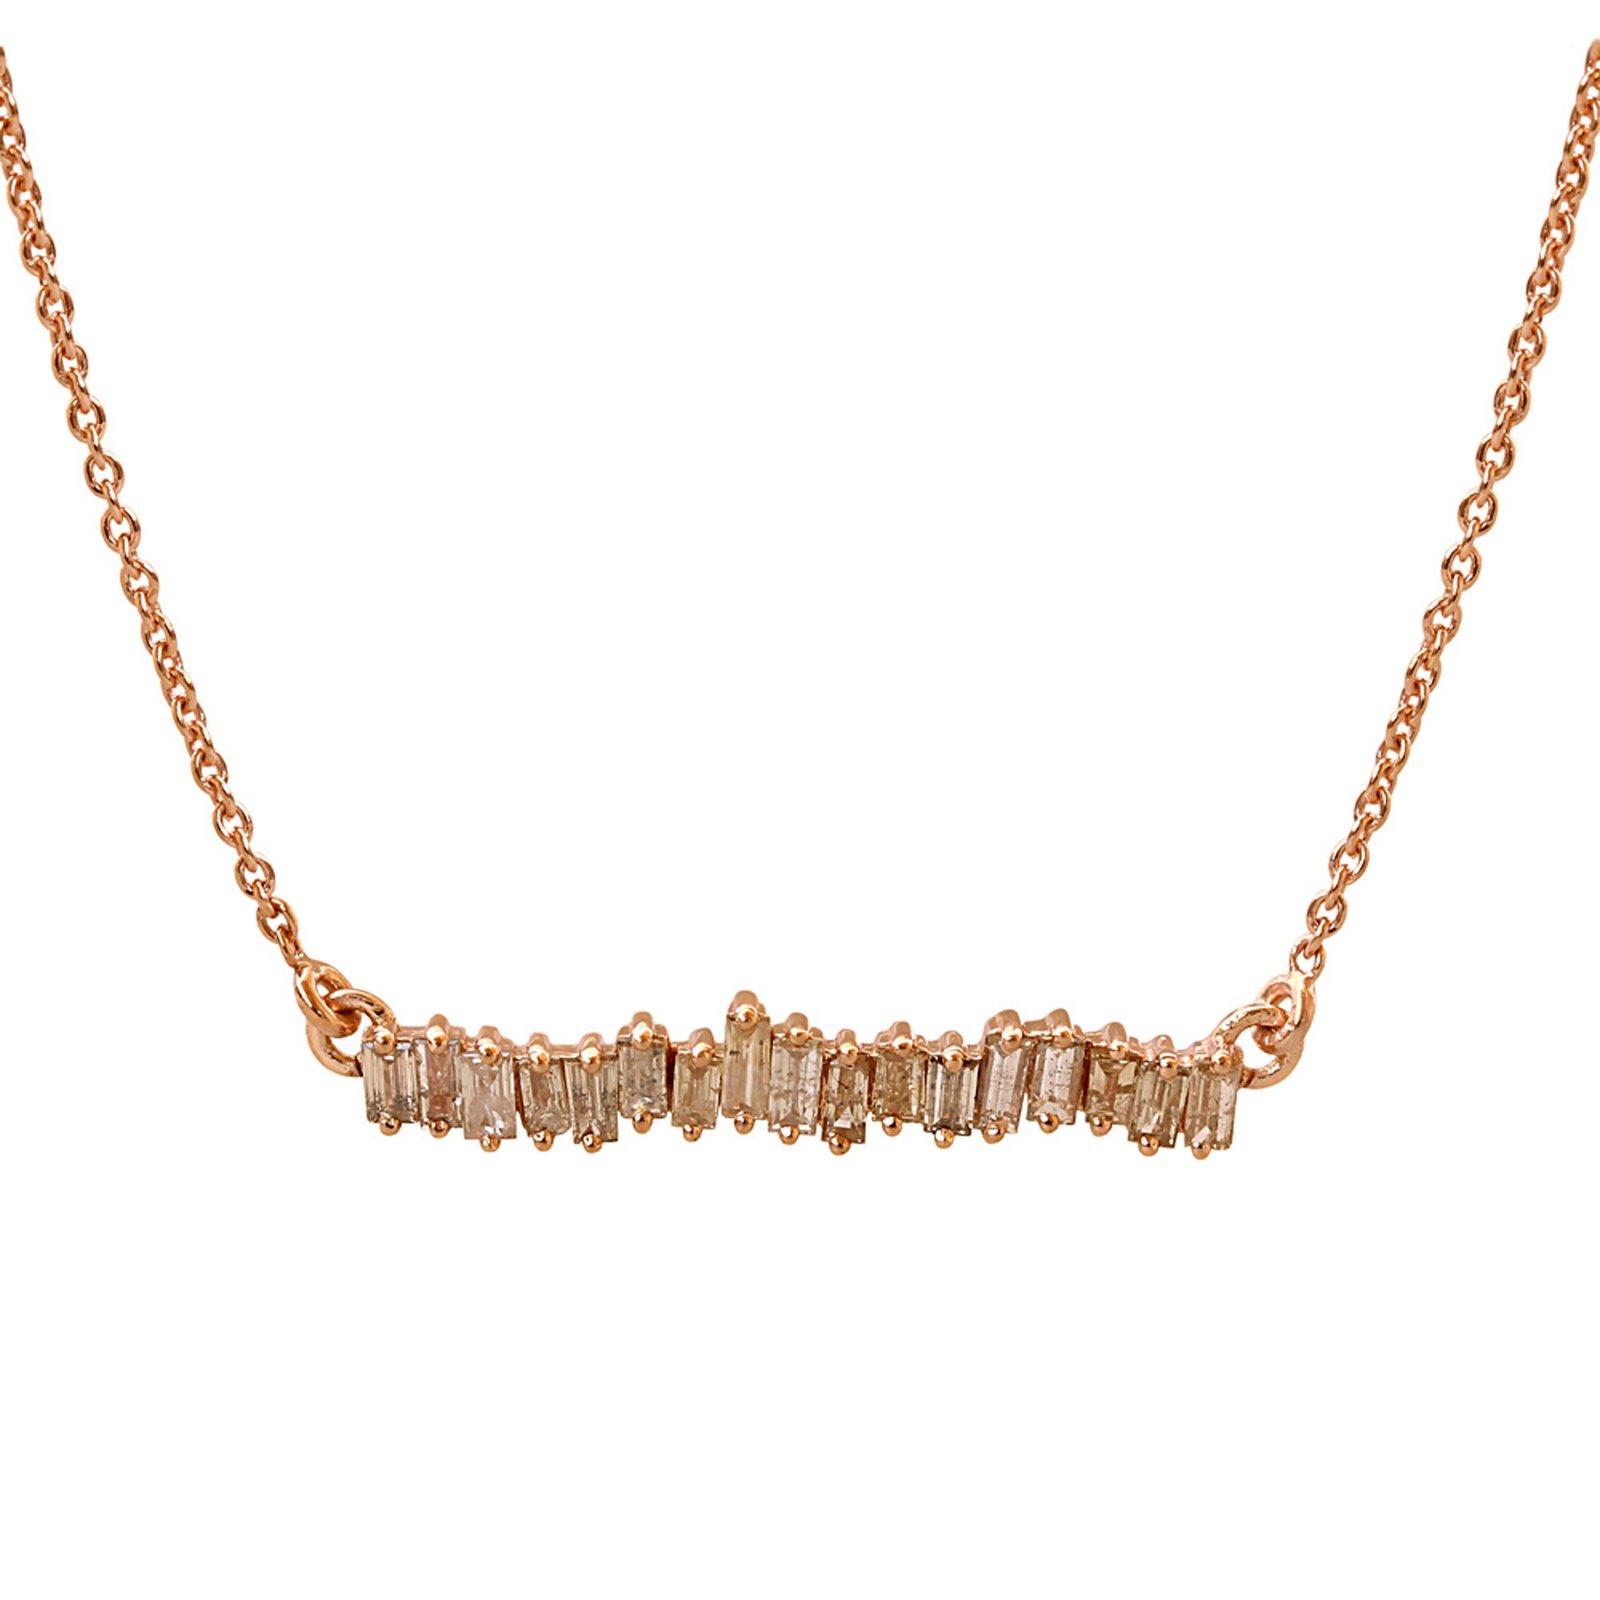 Solid 18k rose gold necklace with chain, Baguette diamond jewelry